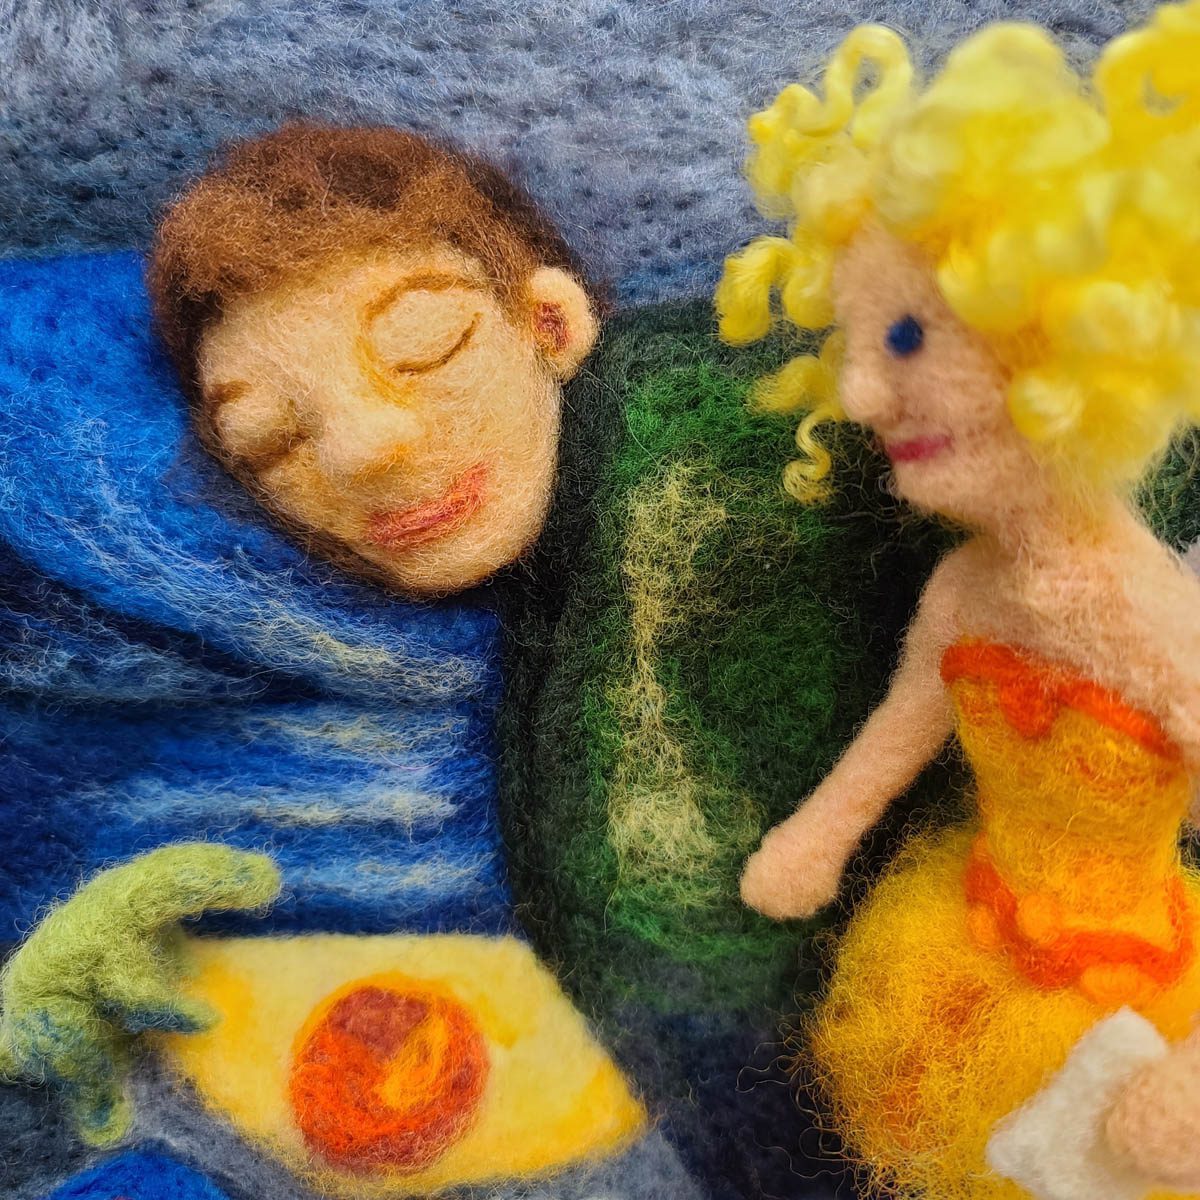 The Sun Fairy cover Illustration, Needle Felting a Picture